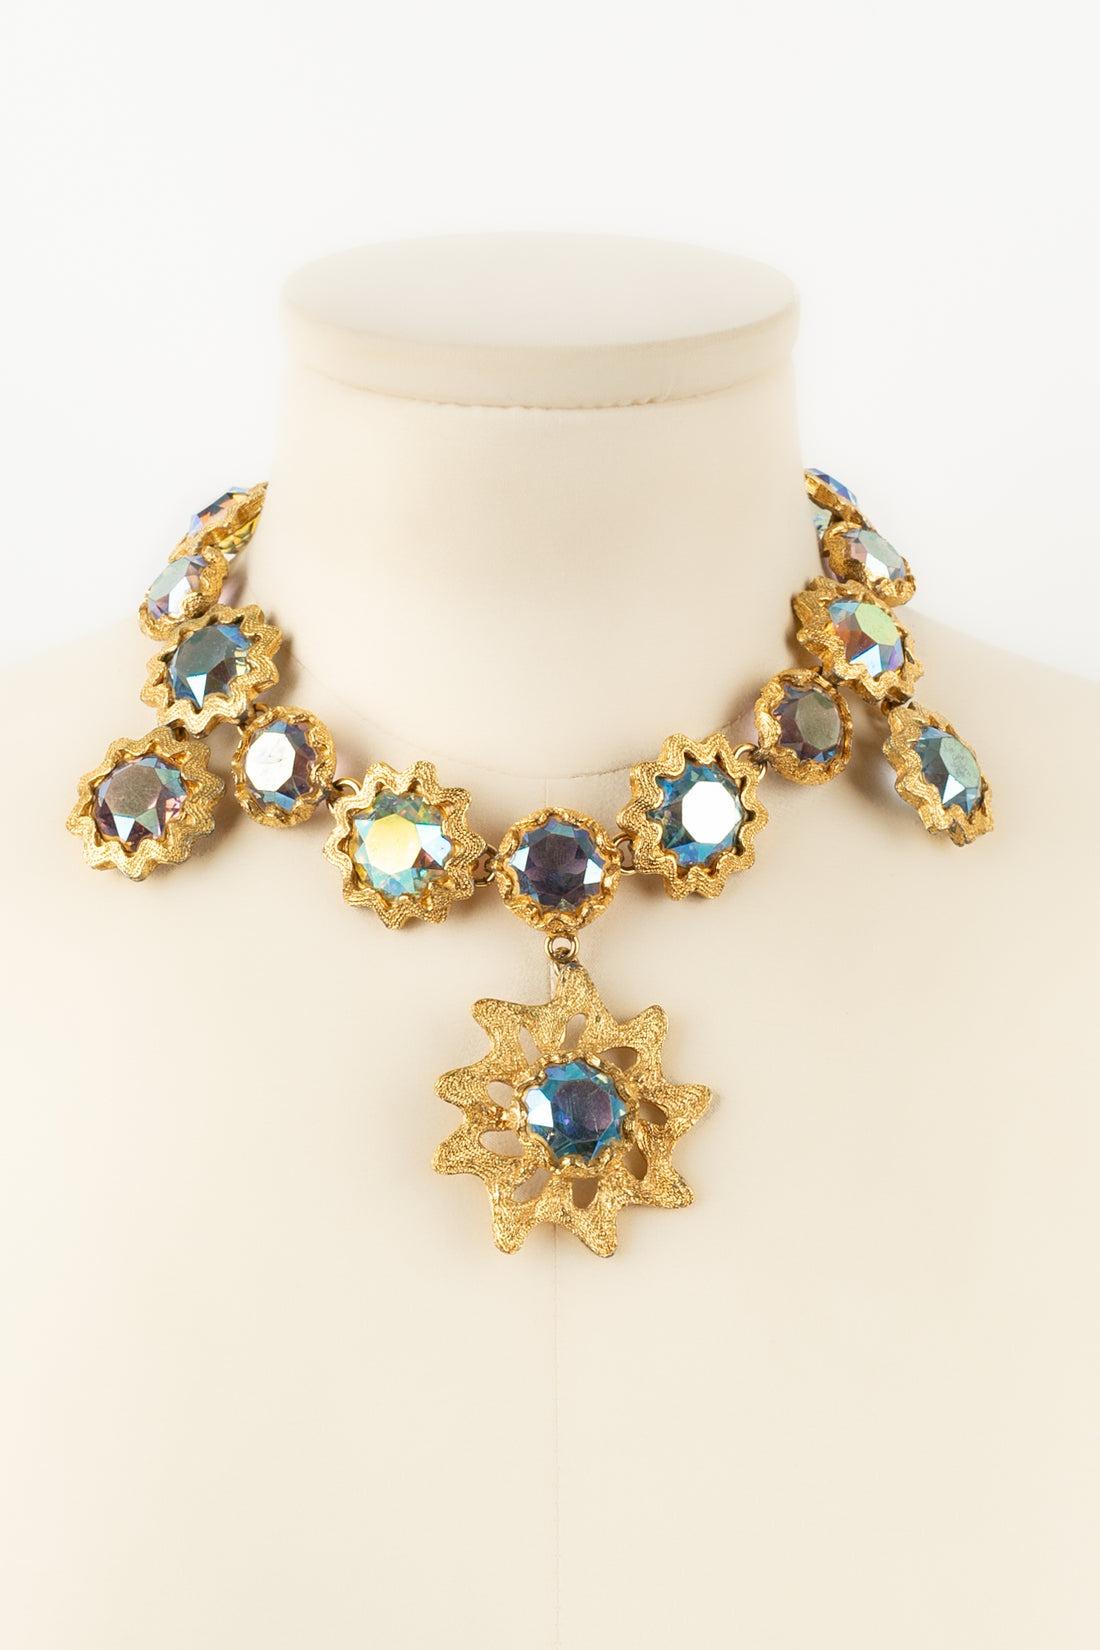 Yves Saint Laurent Short Necklace In Gold-Plated Metal and Rhinestones In Excellent Condition For Sale In SAINT-OUEN-SUR-SEINE, FR